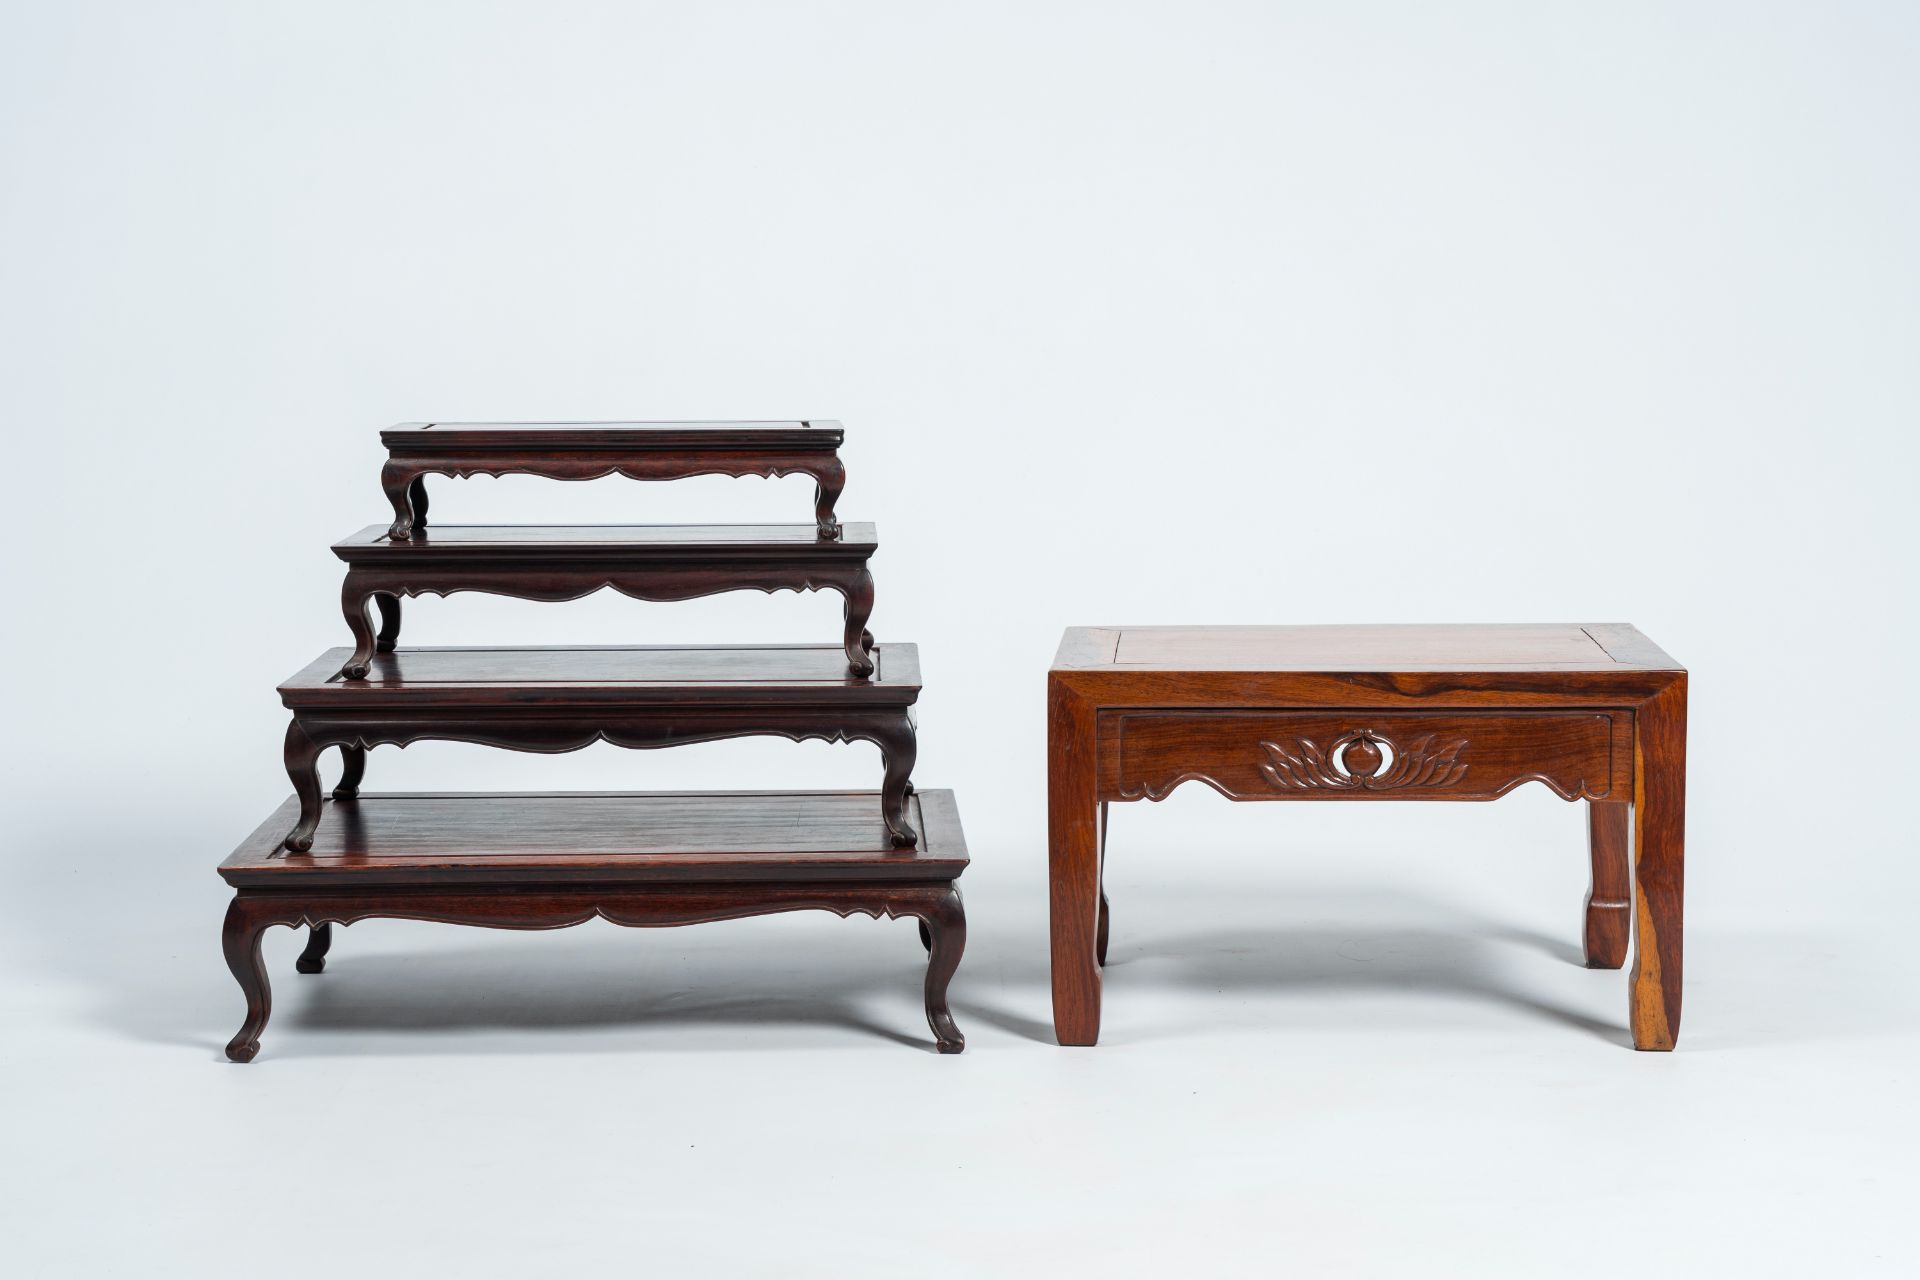 Four Chinese rectangular wood nesting tables and a side table with floral design, 20th C. - Image 5 of 8